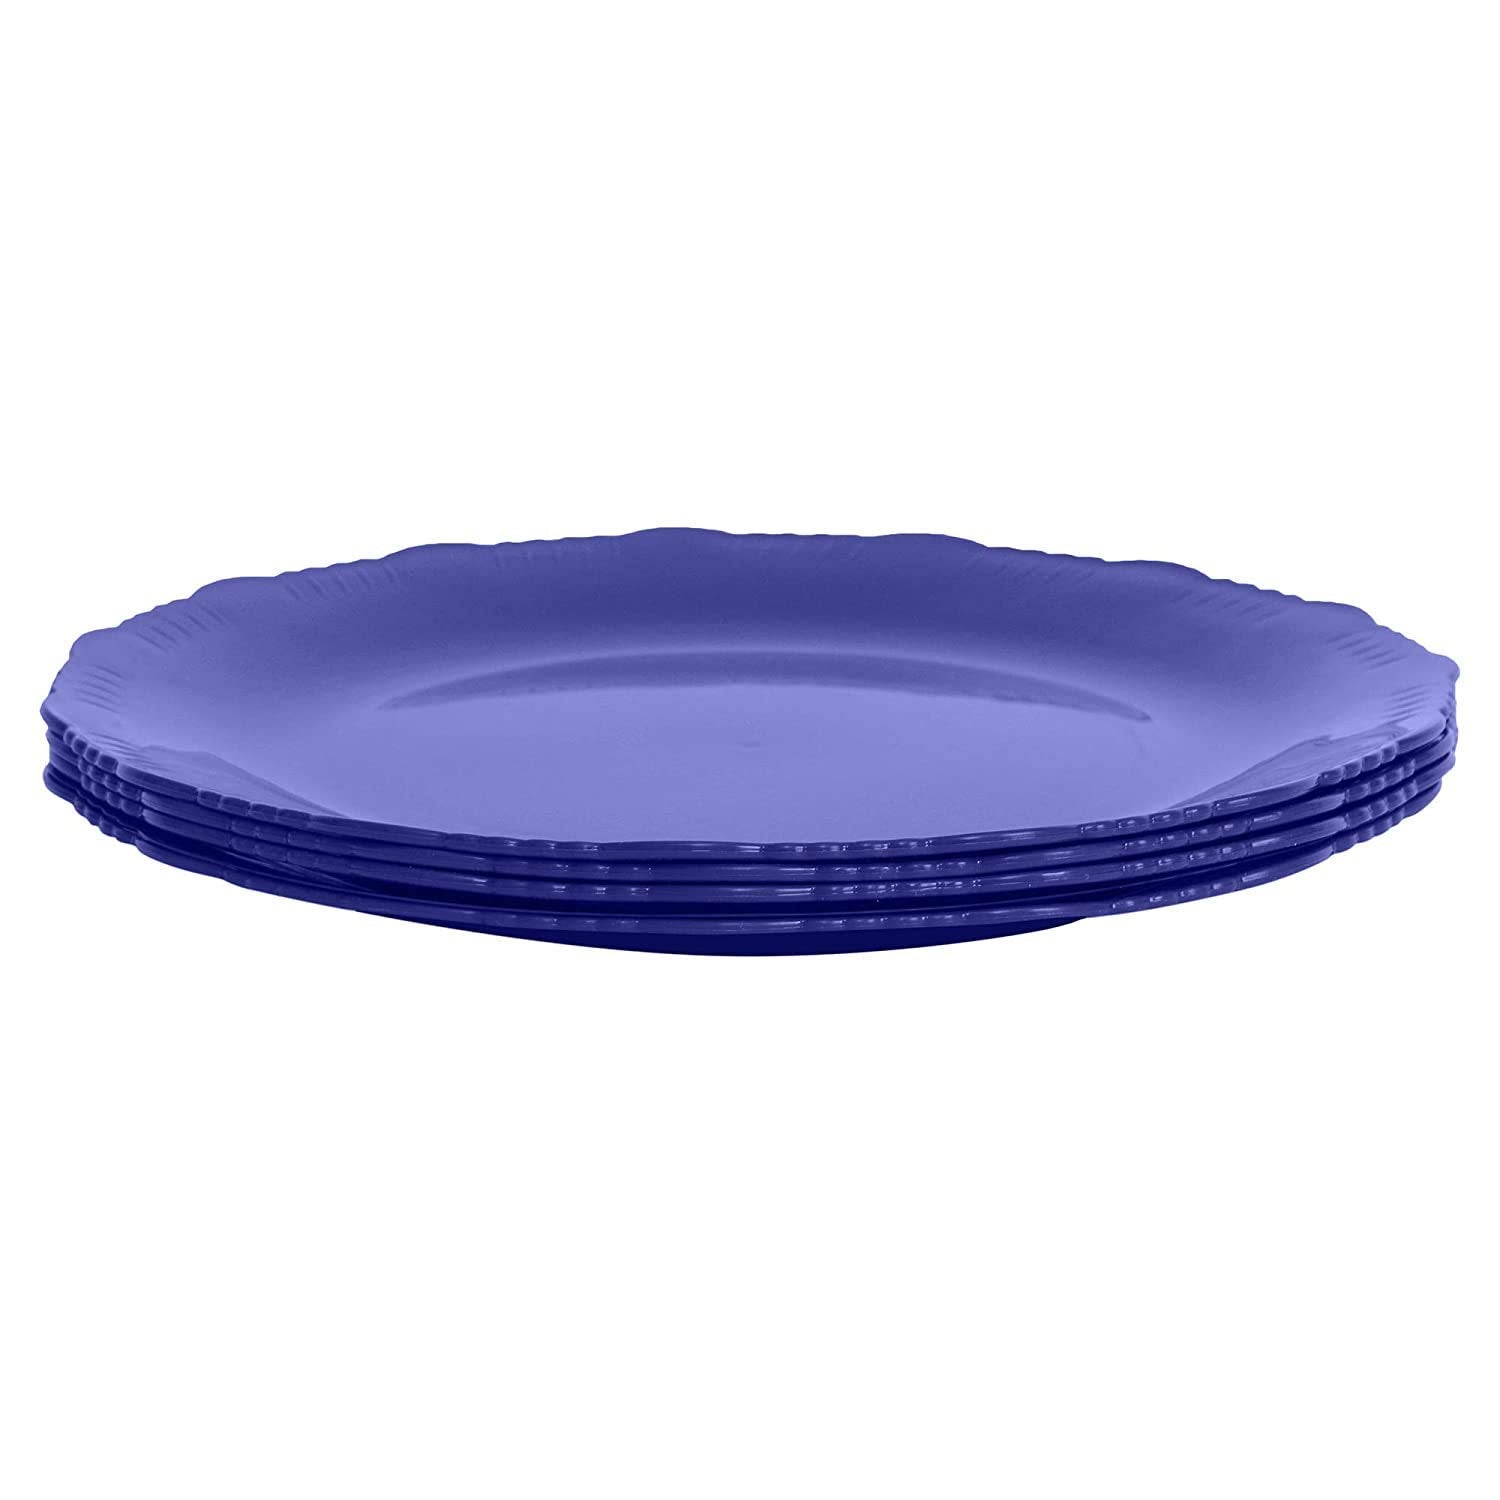 Cutting EDGE Round Colorful Set of Dinner Plates for Families, Daily Use, Parties, Unbreakable, Kid Friendly, Microwave Safe, Dishwasher Safe - Dark Blue (Set of 4)